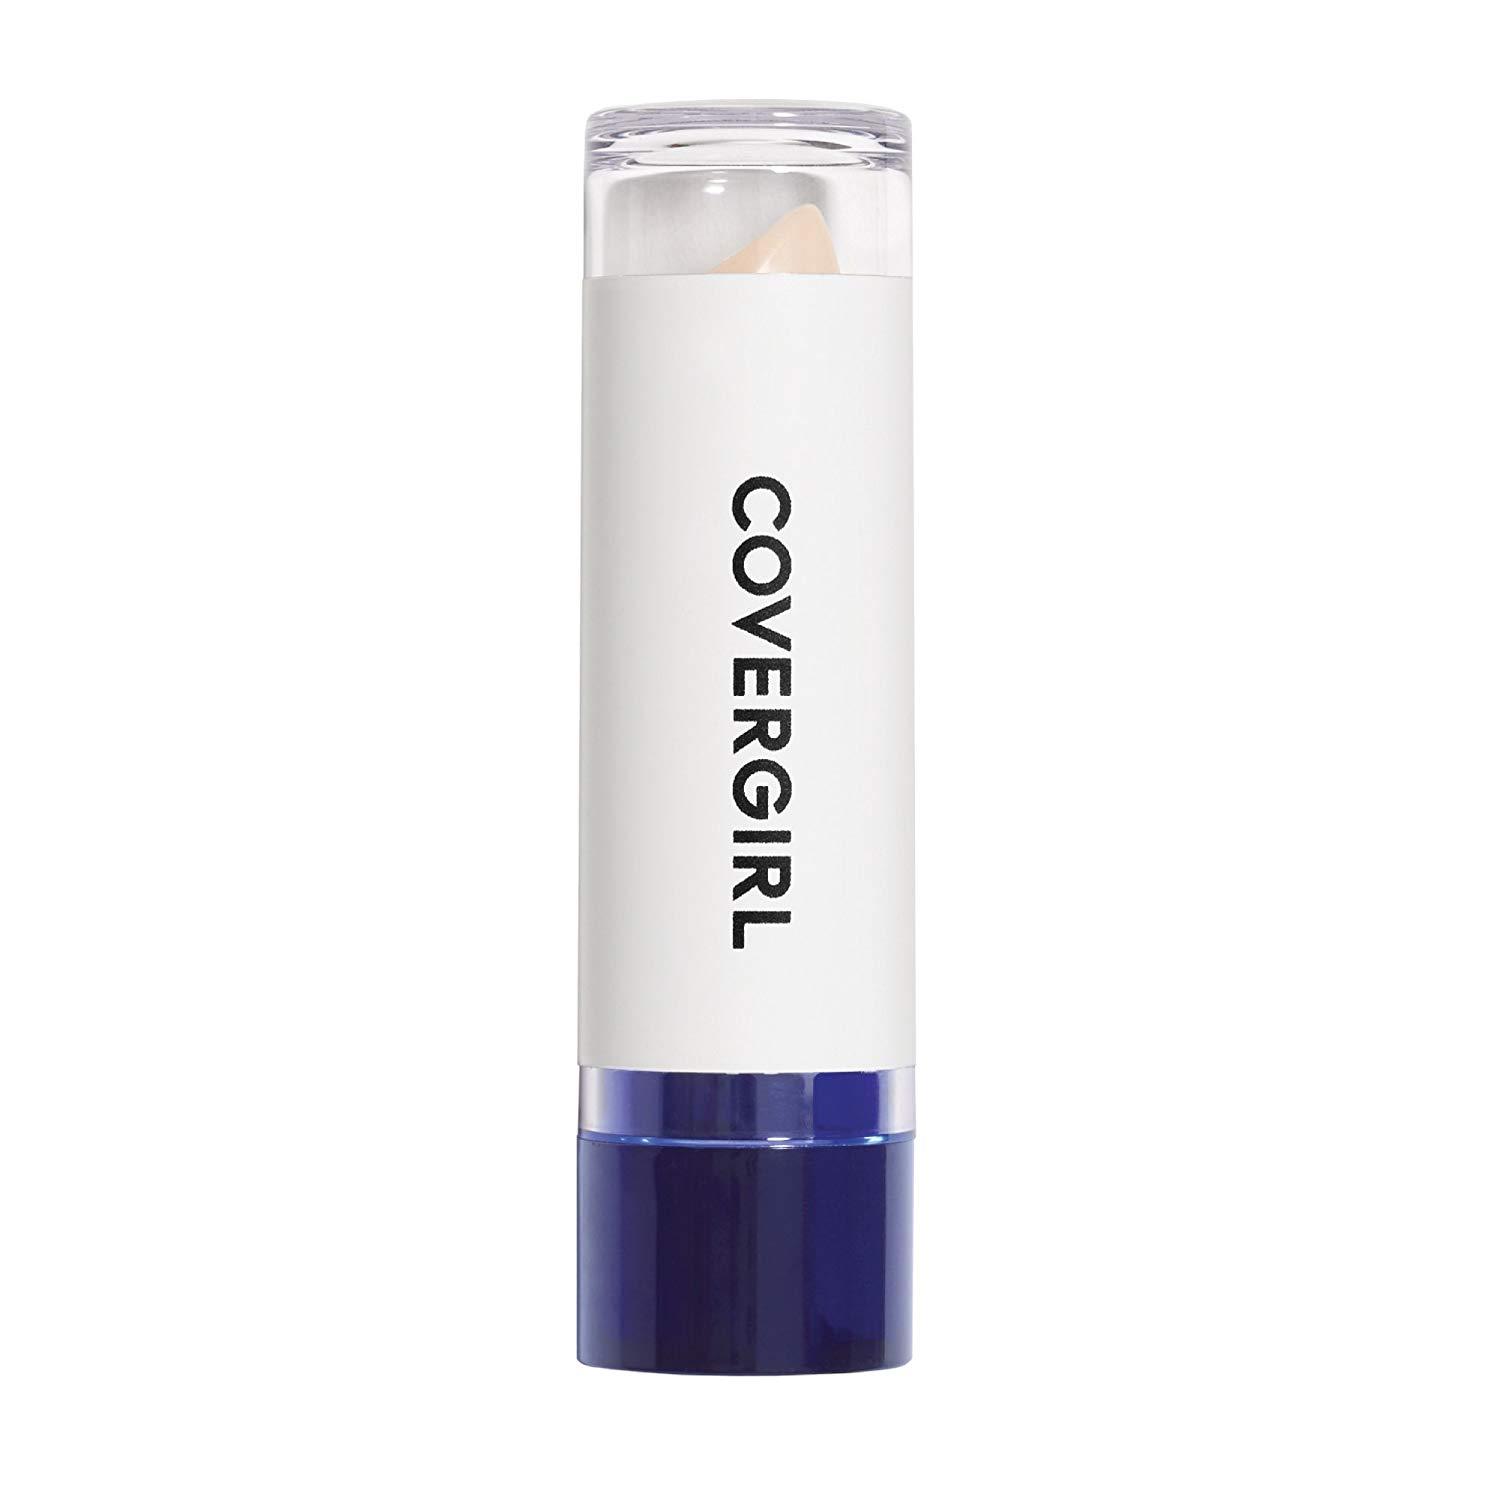 New CoverGirl Smoothers Concealer, Illuminator [725] 0.14 oz